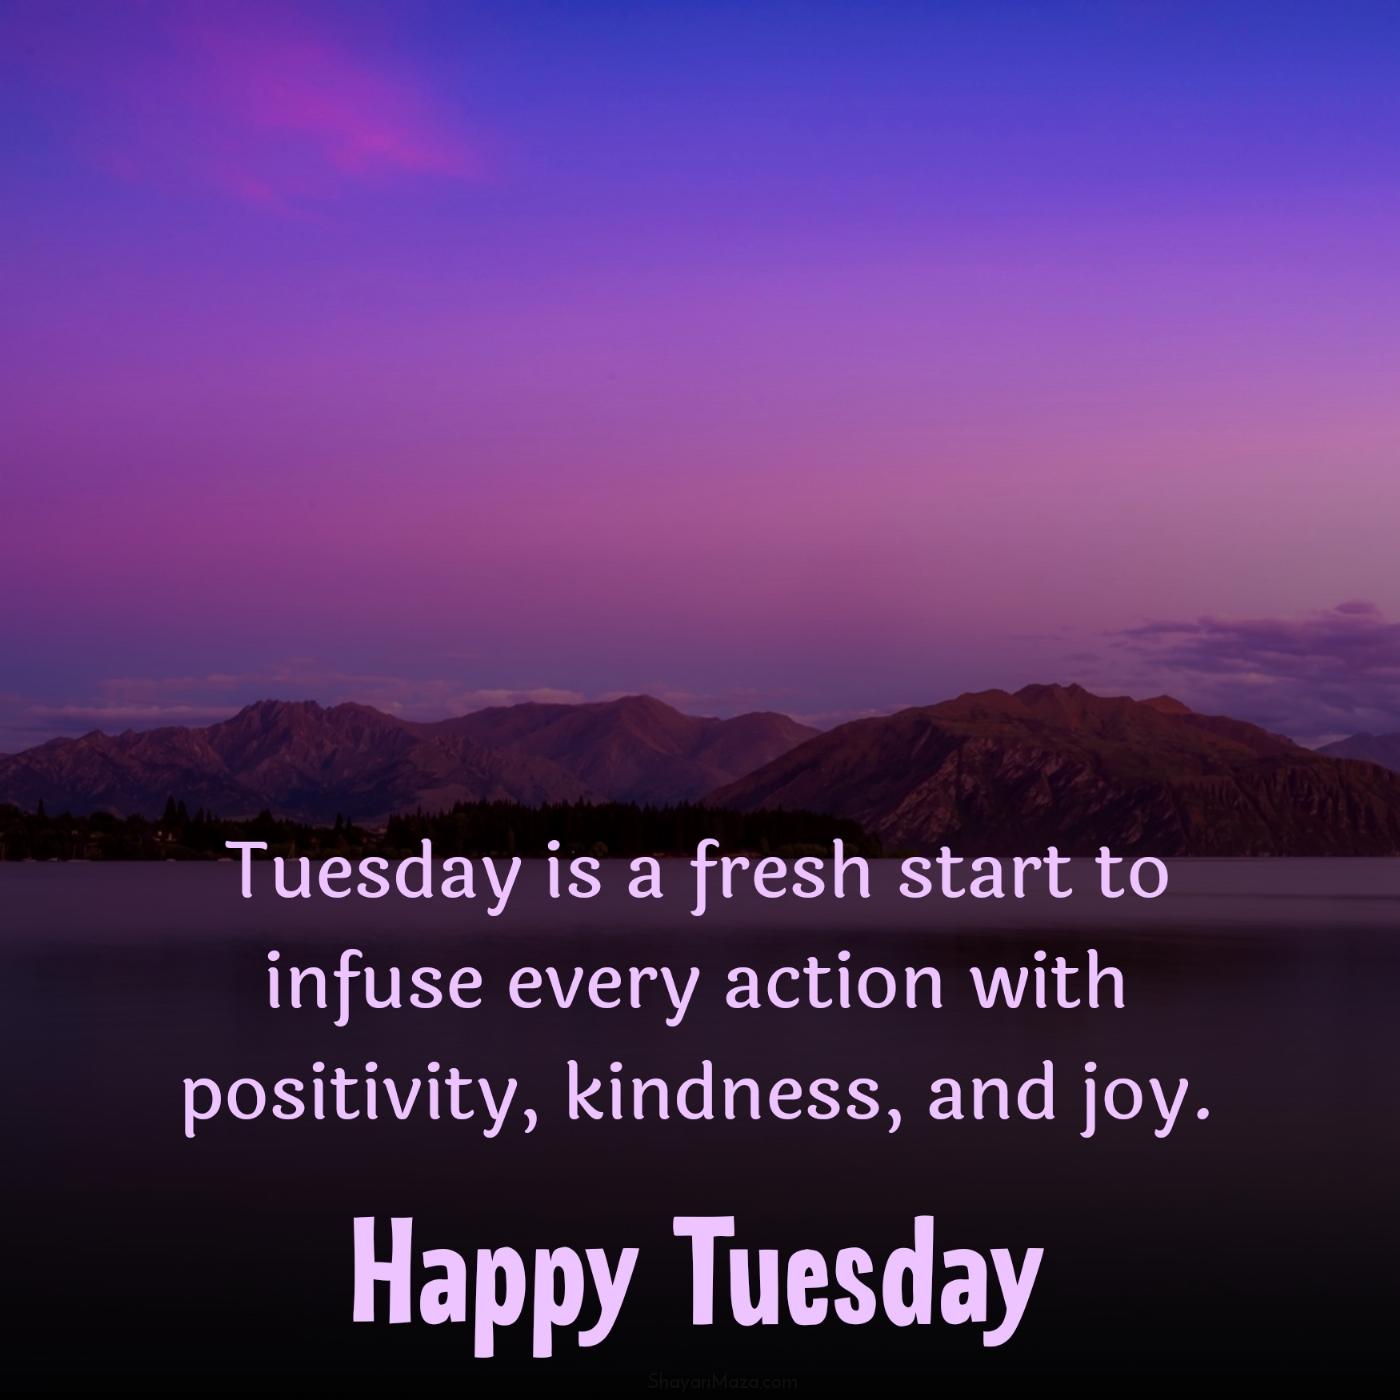 Tuesday is a fresh start to infuse every action with positivity